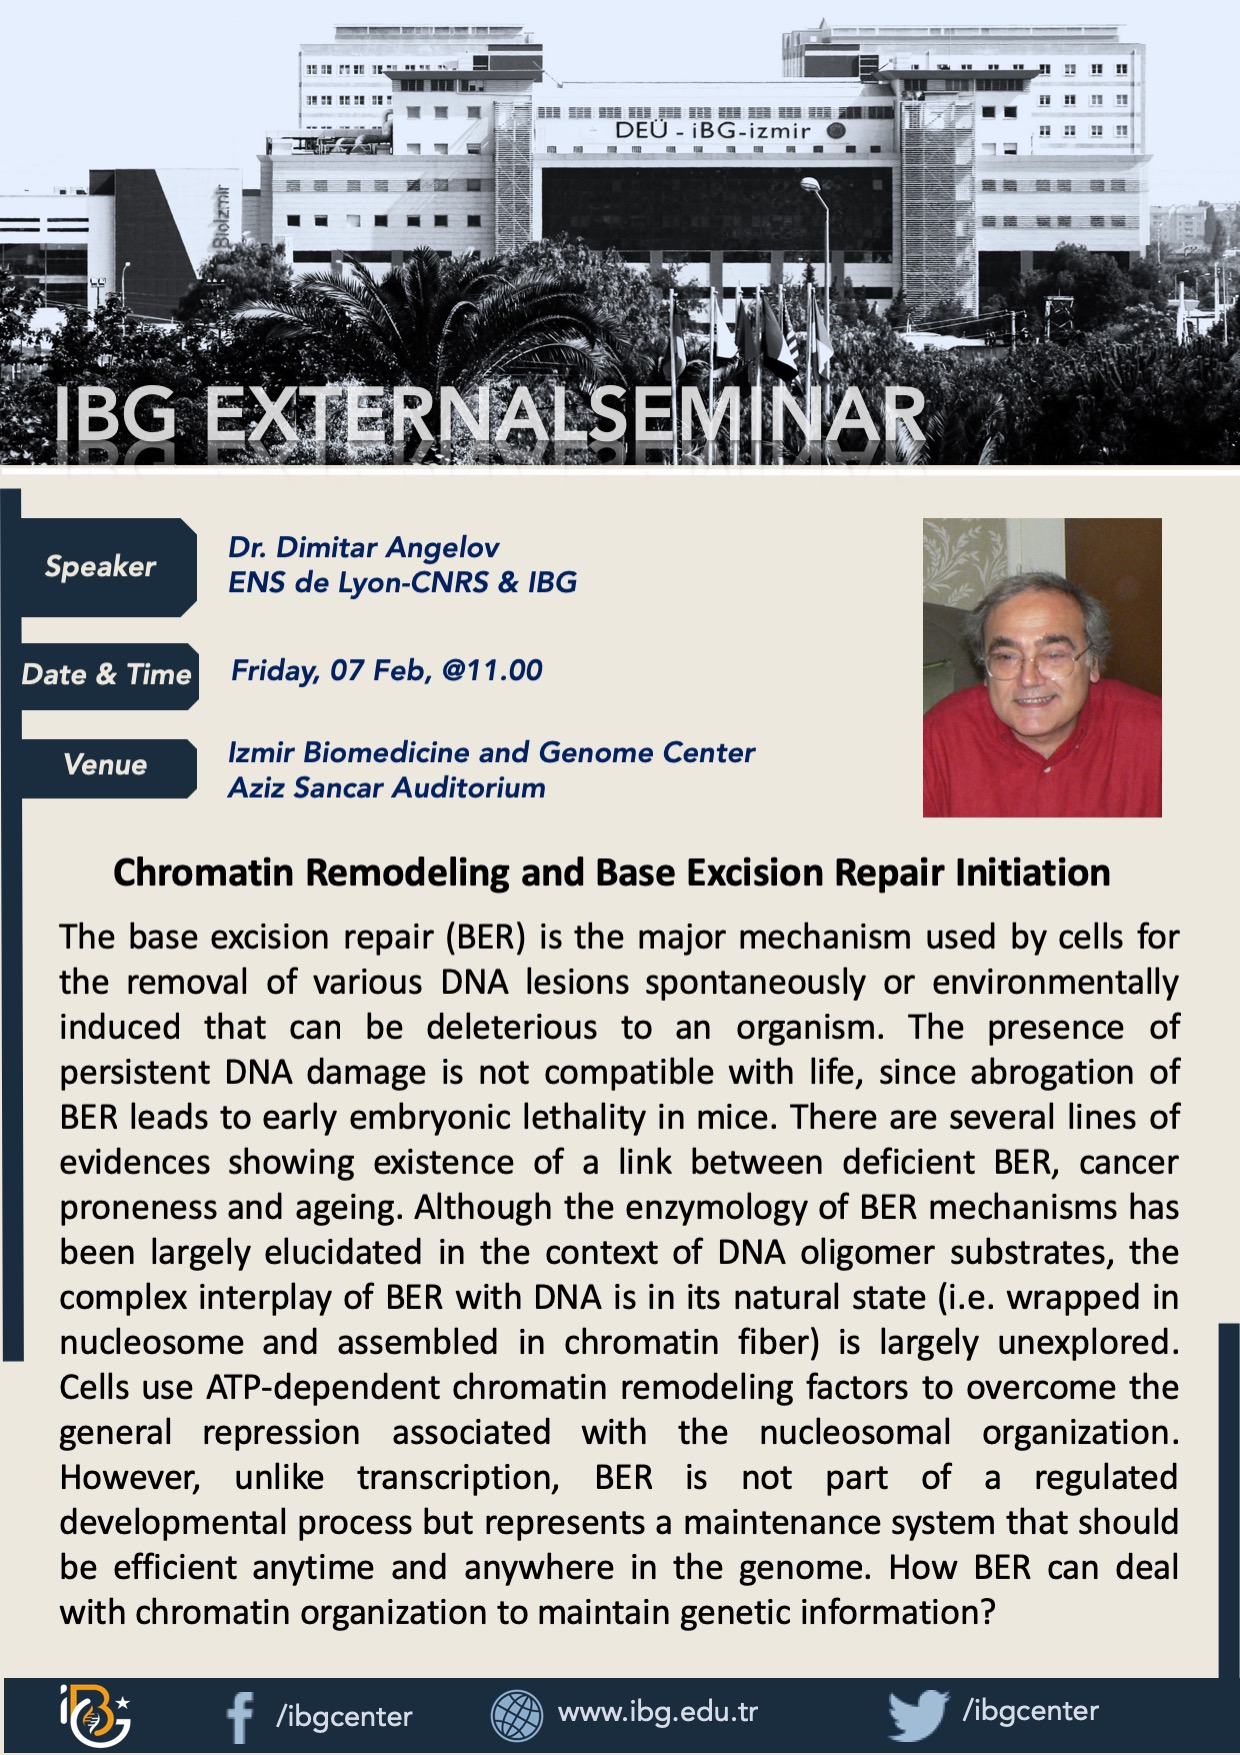 Chromatin Remodeling and Base Excision Repair Initiation